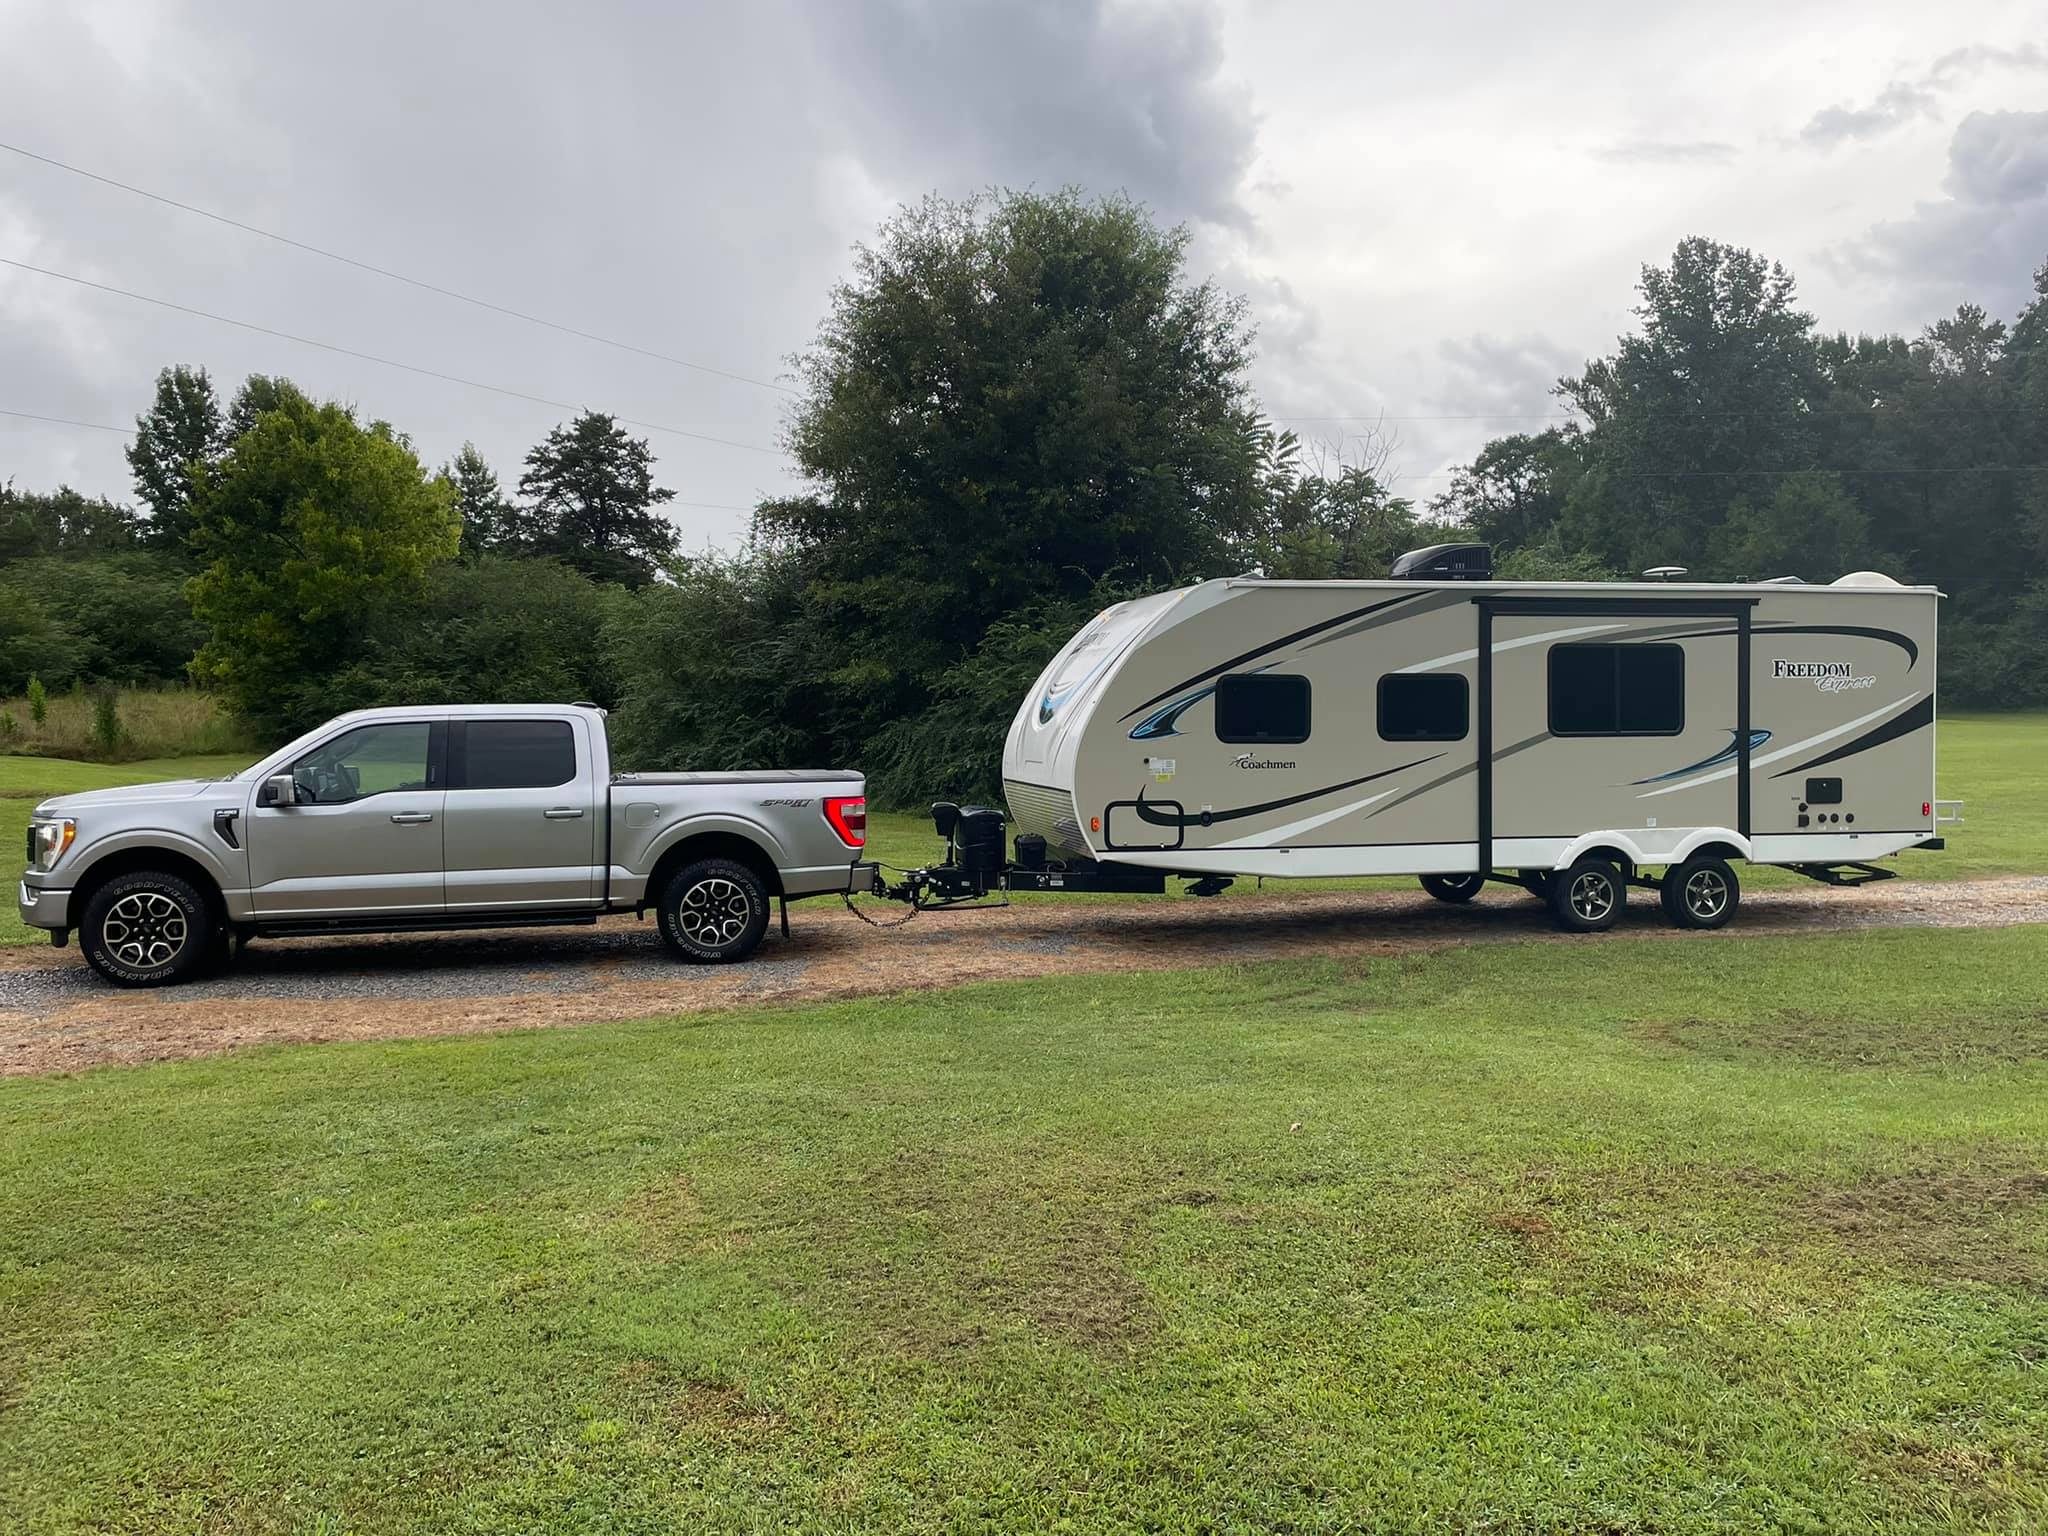 Truck, 3P , and RV